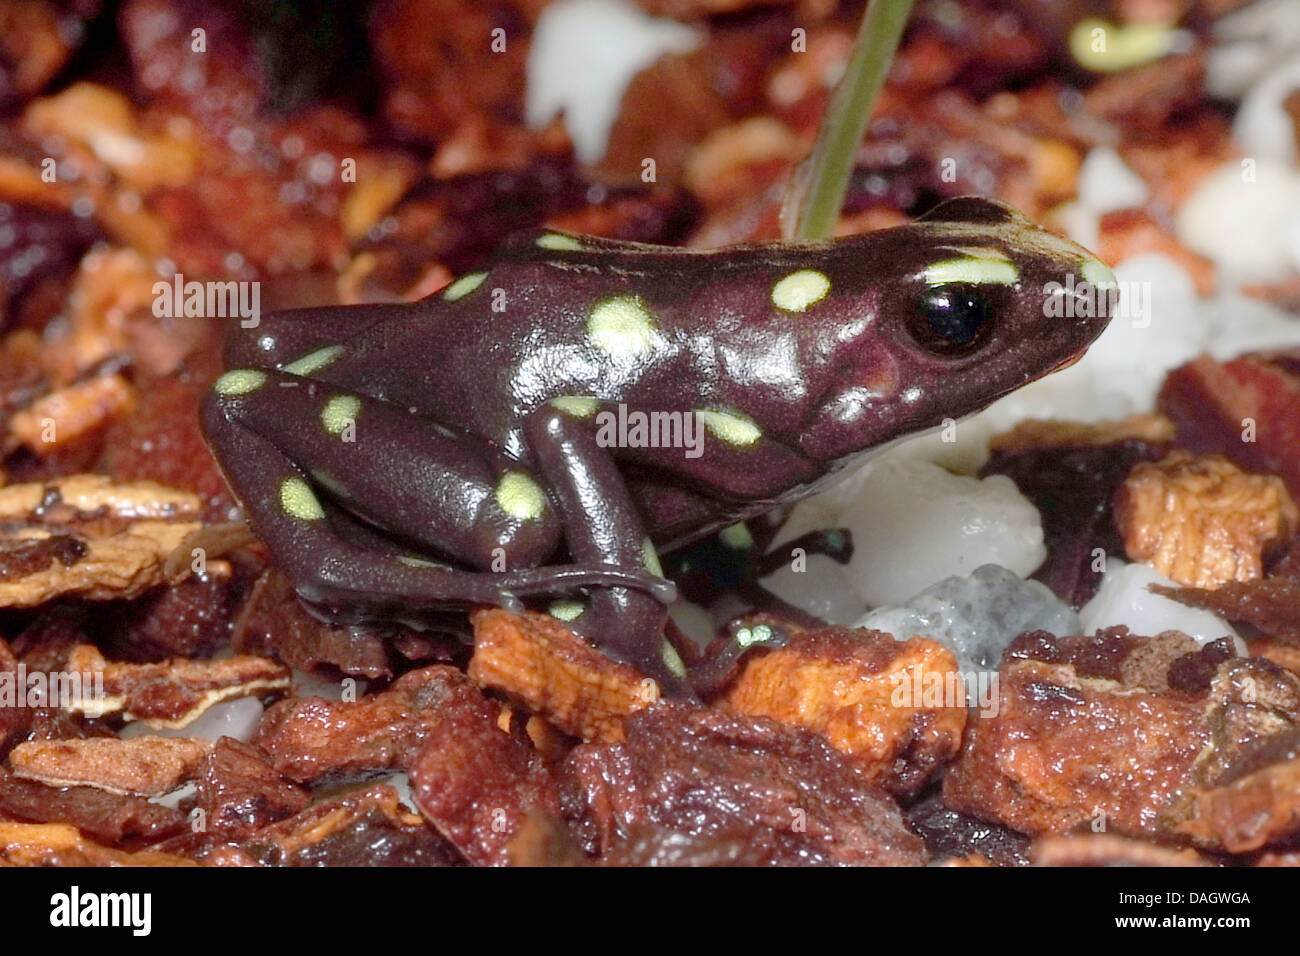 Green and black poison-arrow frog, Green and black poison frog (Dendrobates auratus), black and yellow morph from the canal zone, KZ Ffm Stock Photo